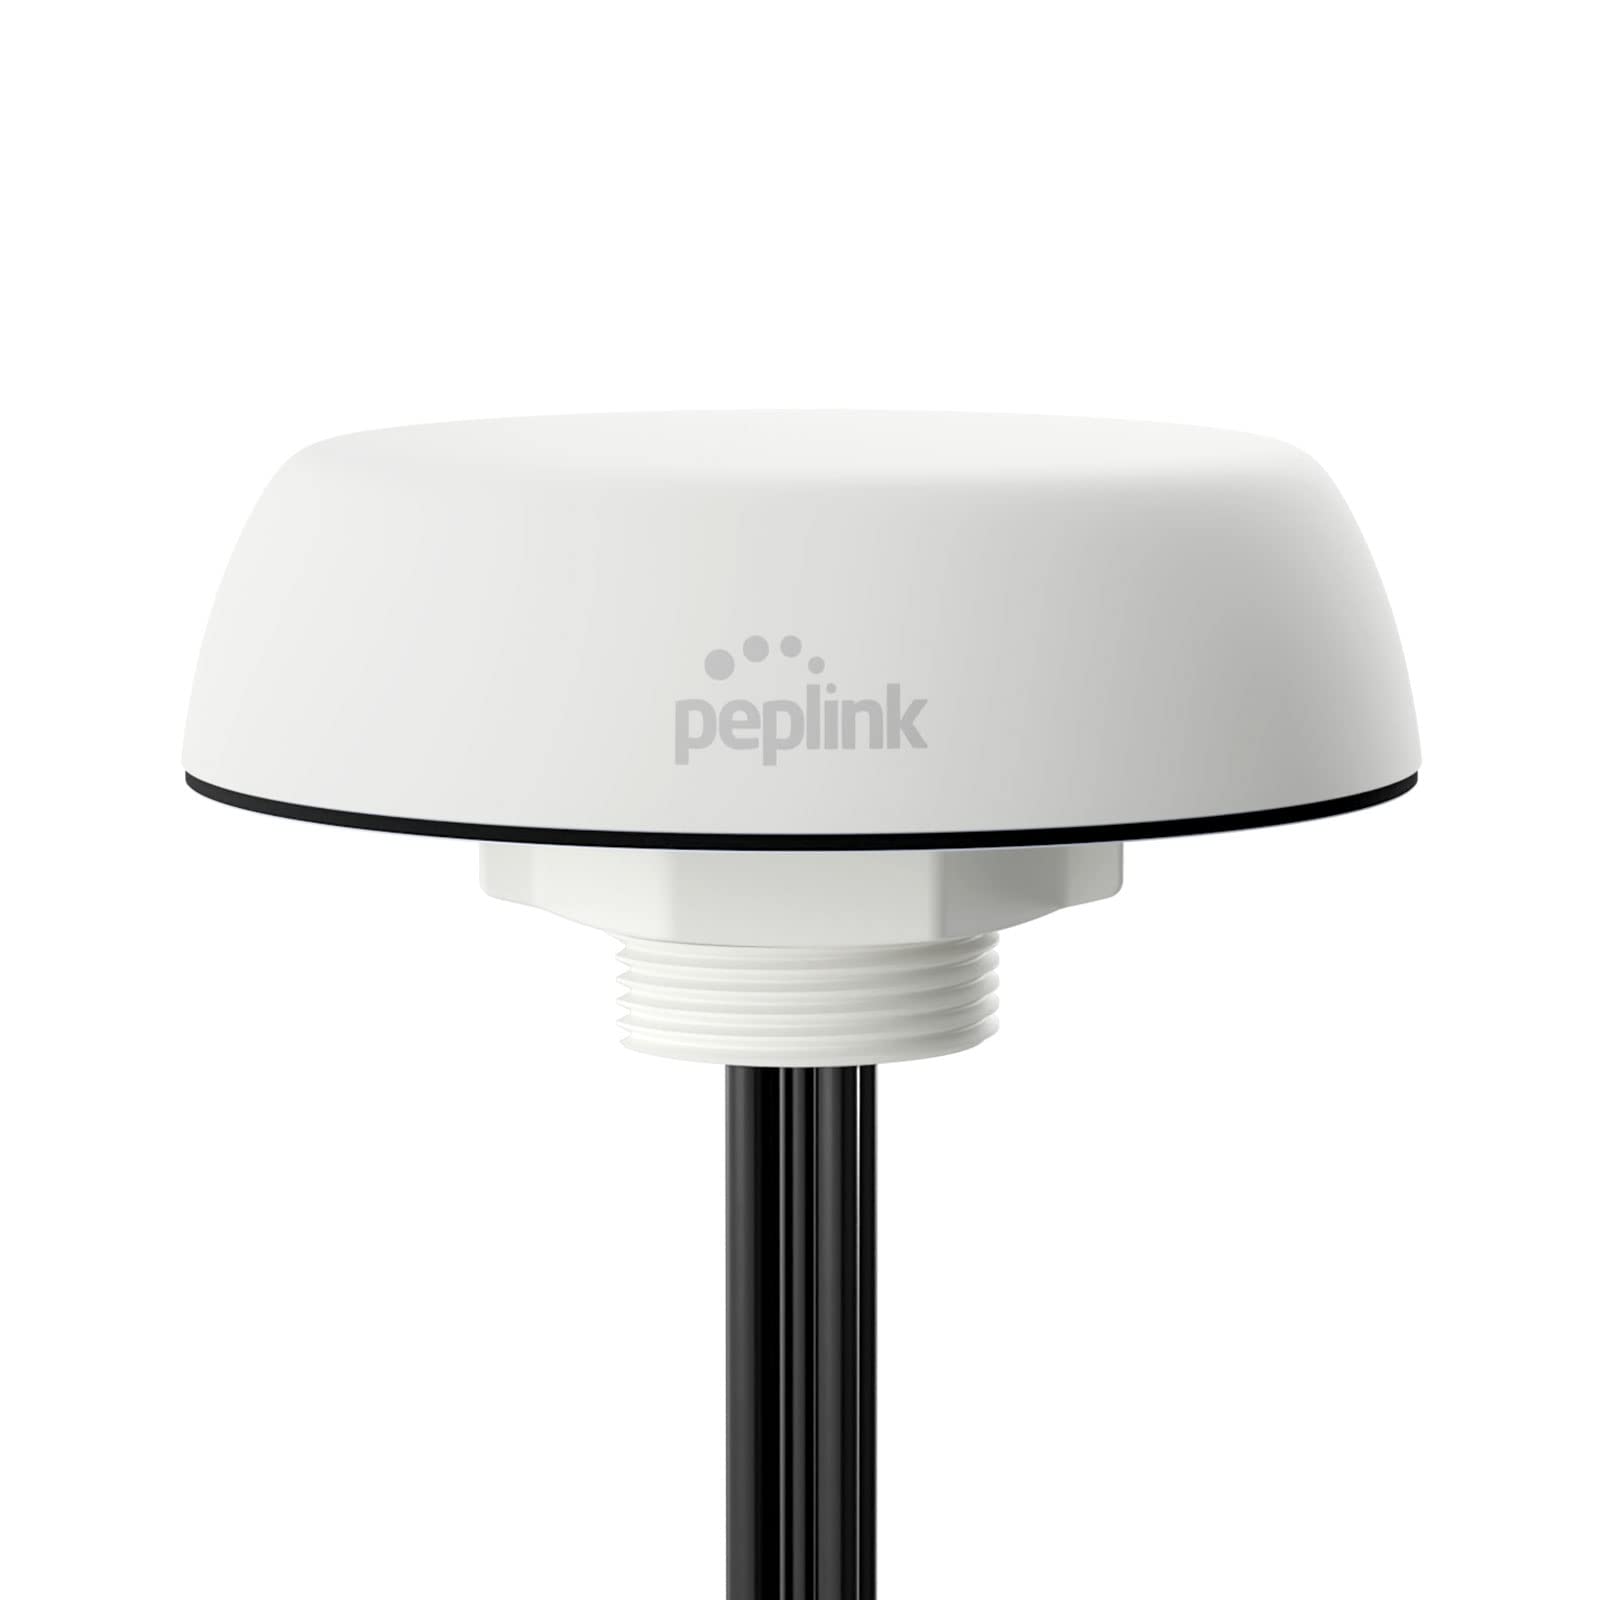 Peplink Mobility 22G, 5-in-1 Cellular and Wi-Fi Antenna with GPS Receiver, SMA and RSMA, 6.5ft/2m, White | ANT-MB-22G-S-W-6